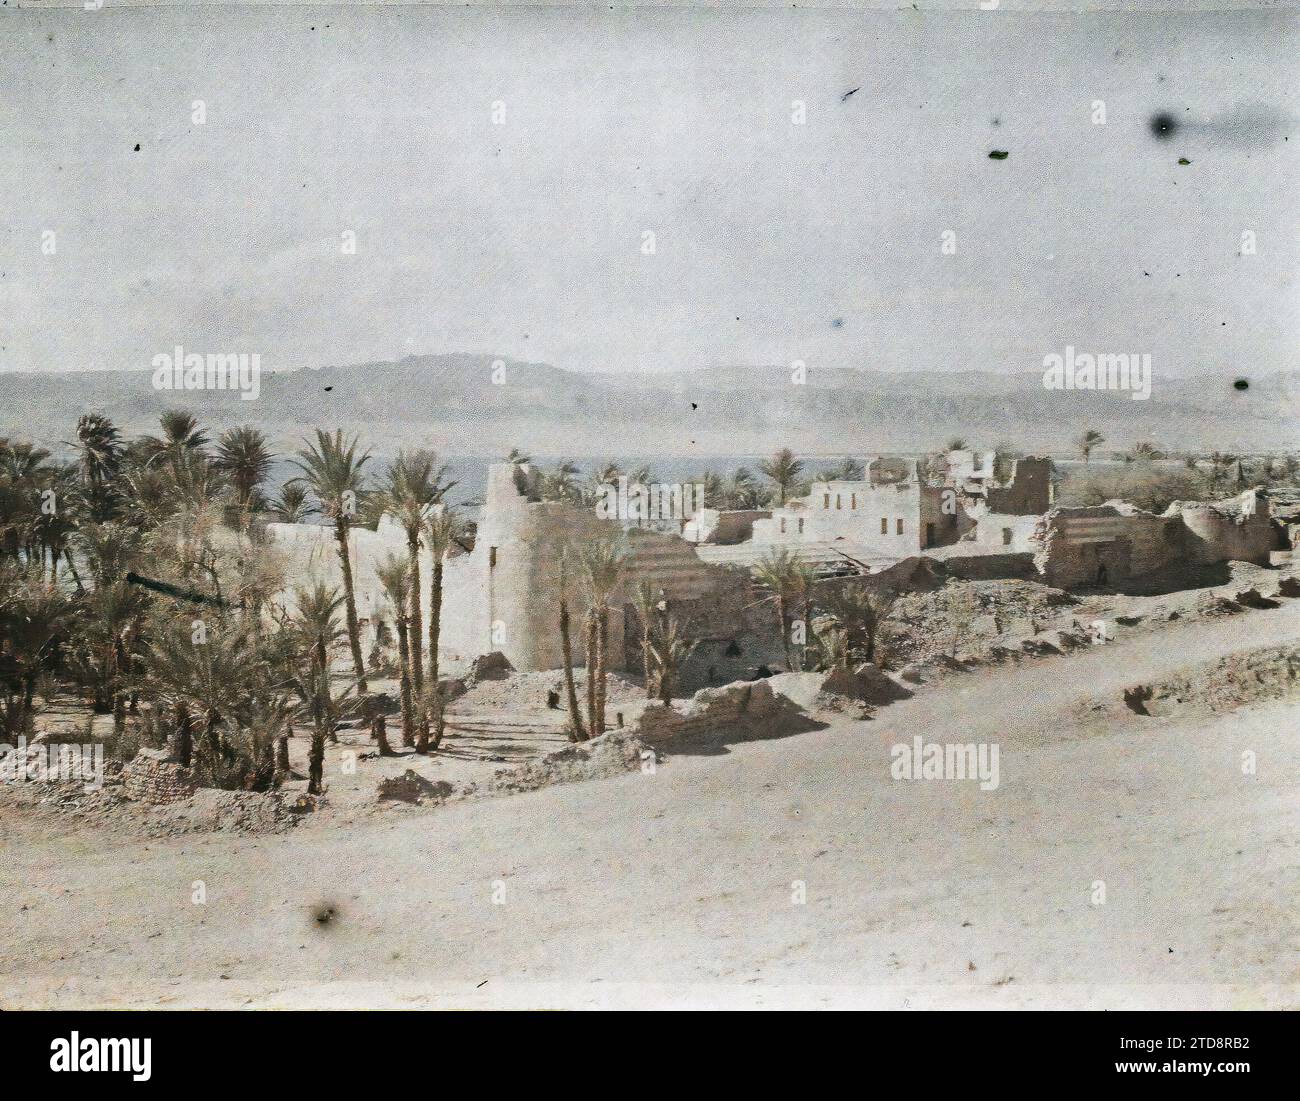 Aqaba, Arabia (current Jordan) The fort of the Ottoman garrison, Habitat, Architecture, Nature, Environment, Palm tree, Palm grove, Fortified architecture, Fortress, Vegetation, botany, Arabia, Akaba, The fort, Aqaba, 25/02/1918 - 25/02/1918, Castelnau, Paul, 1918 - Middle East, Egypte, Palestine, Chypre - Paul Castelnau (Photographic section of the army) - (9 January-6 October), Autochrome, photo, Glass, Autochrome, photo, Positive, Horizontal, Size 9 x 12 cm Stock Photo